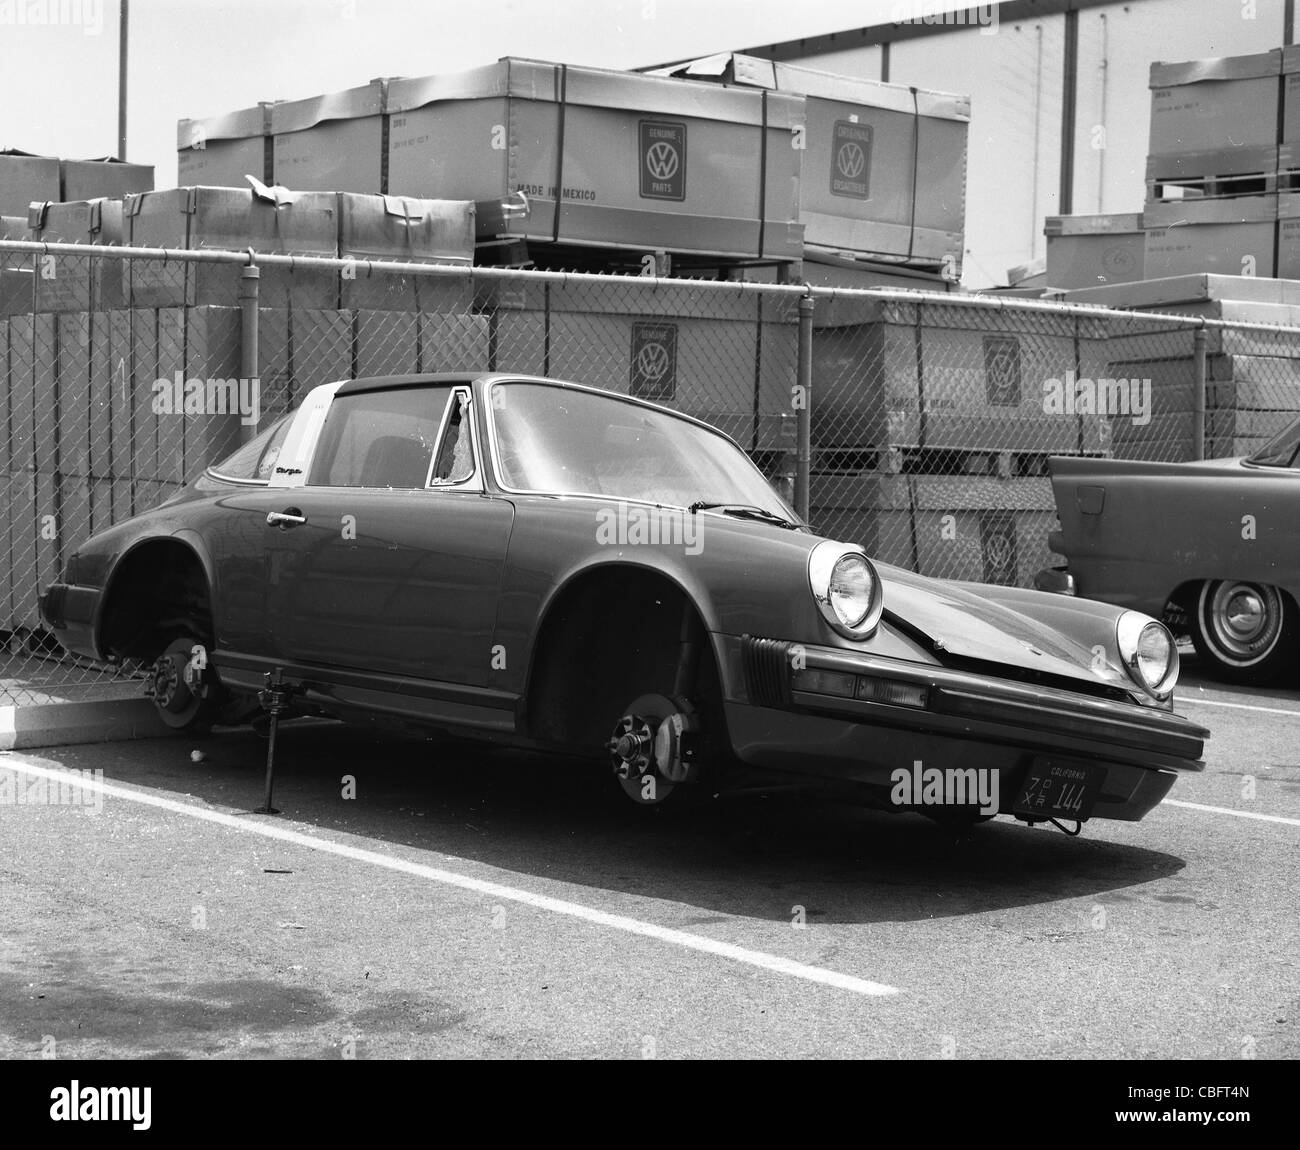 porsche carrera 1970s model parked with wheels missing german sports car Stock Photo